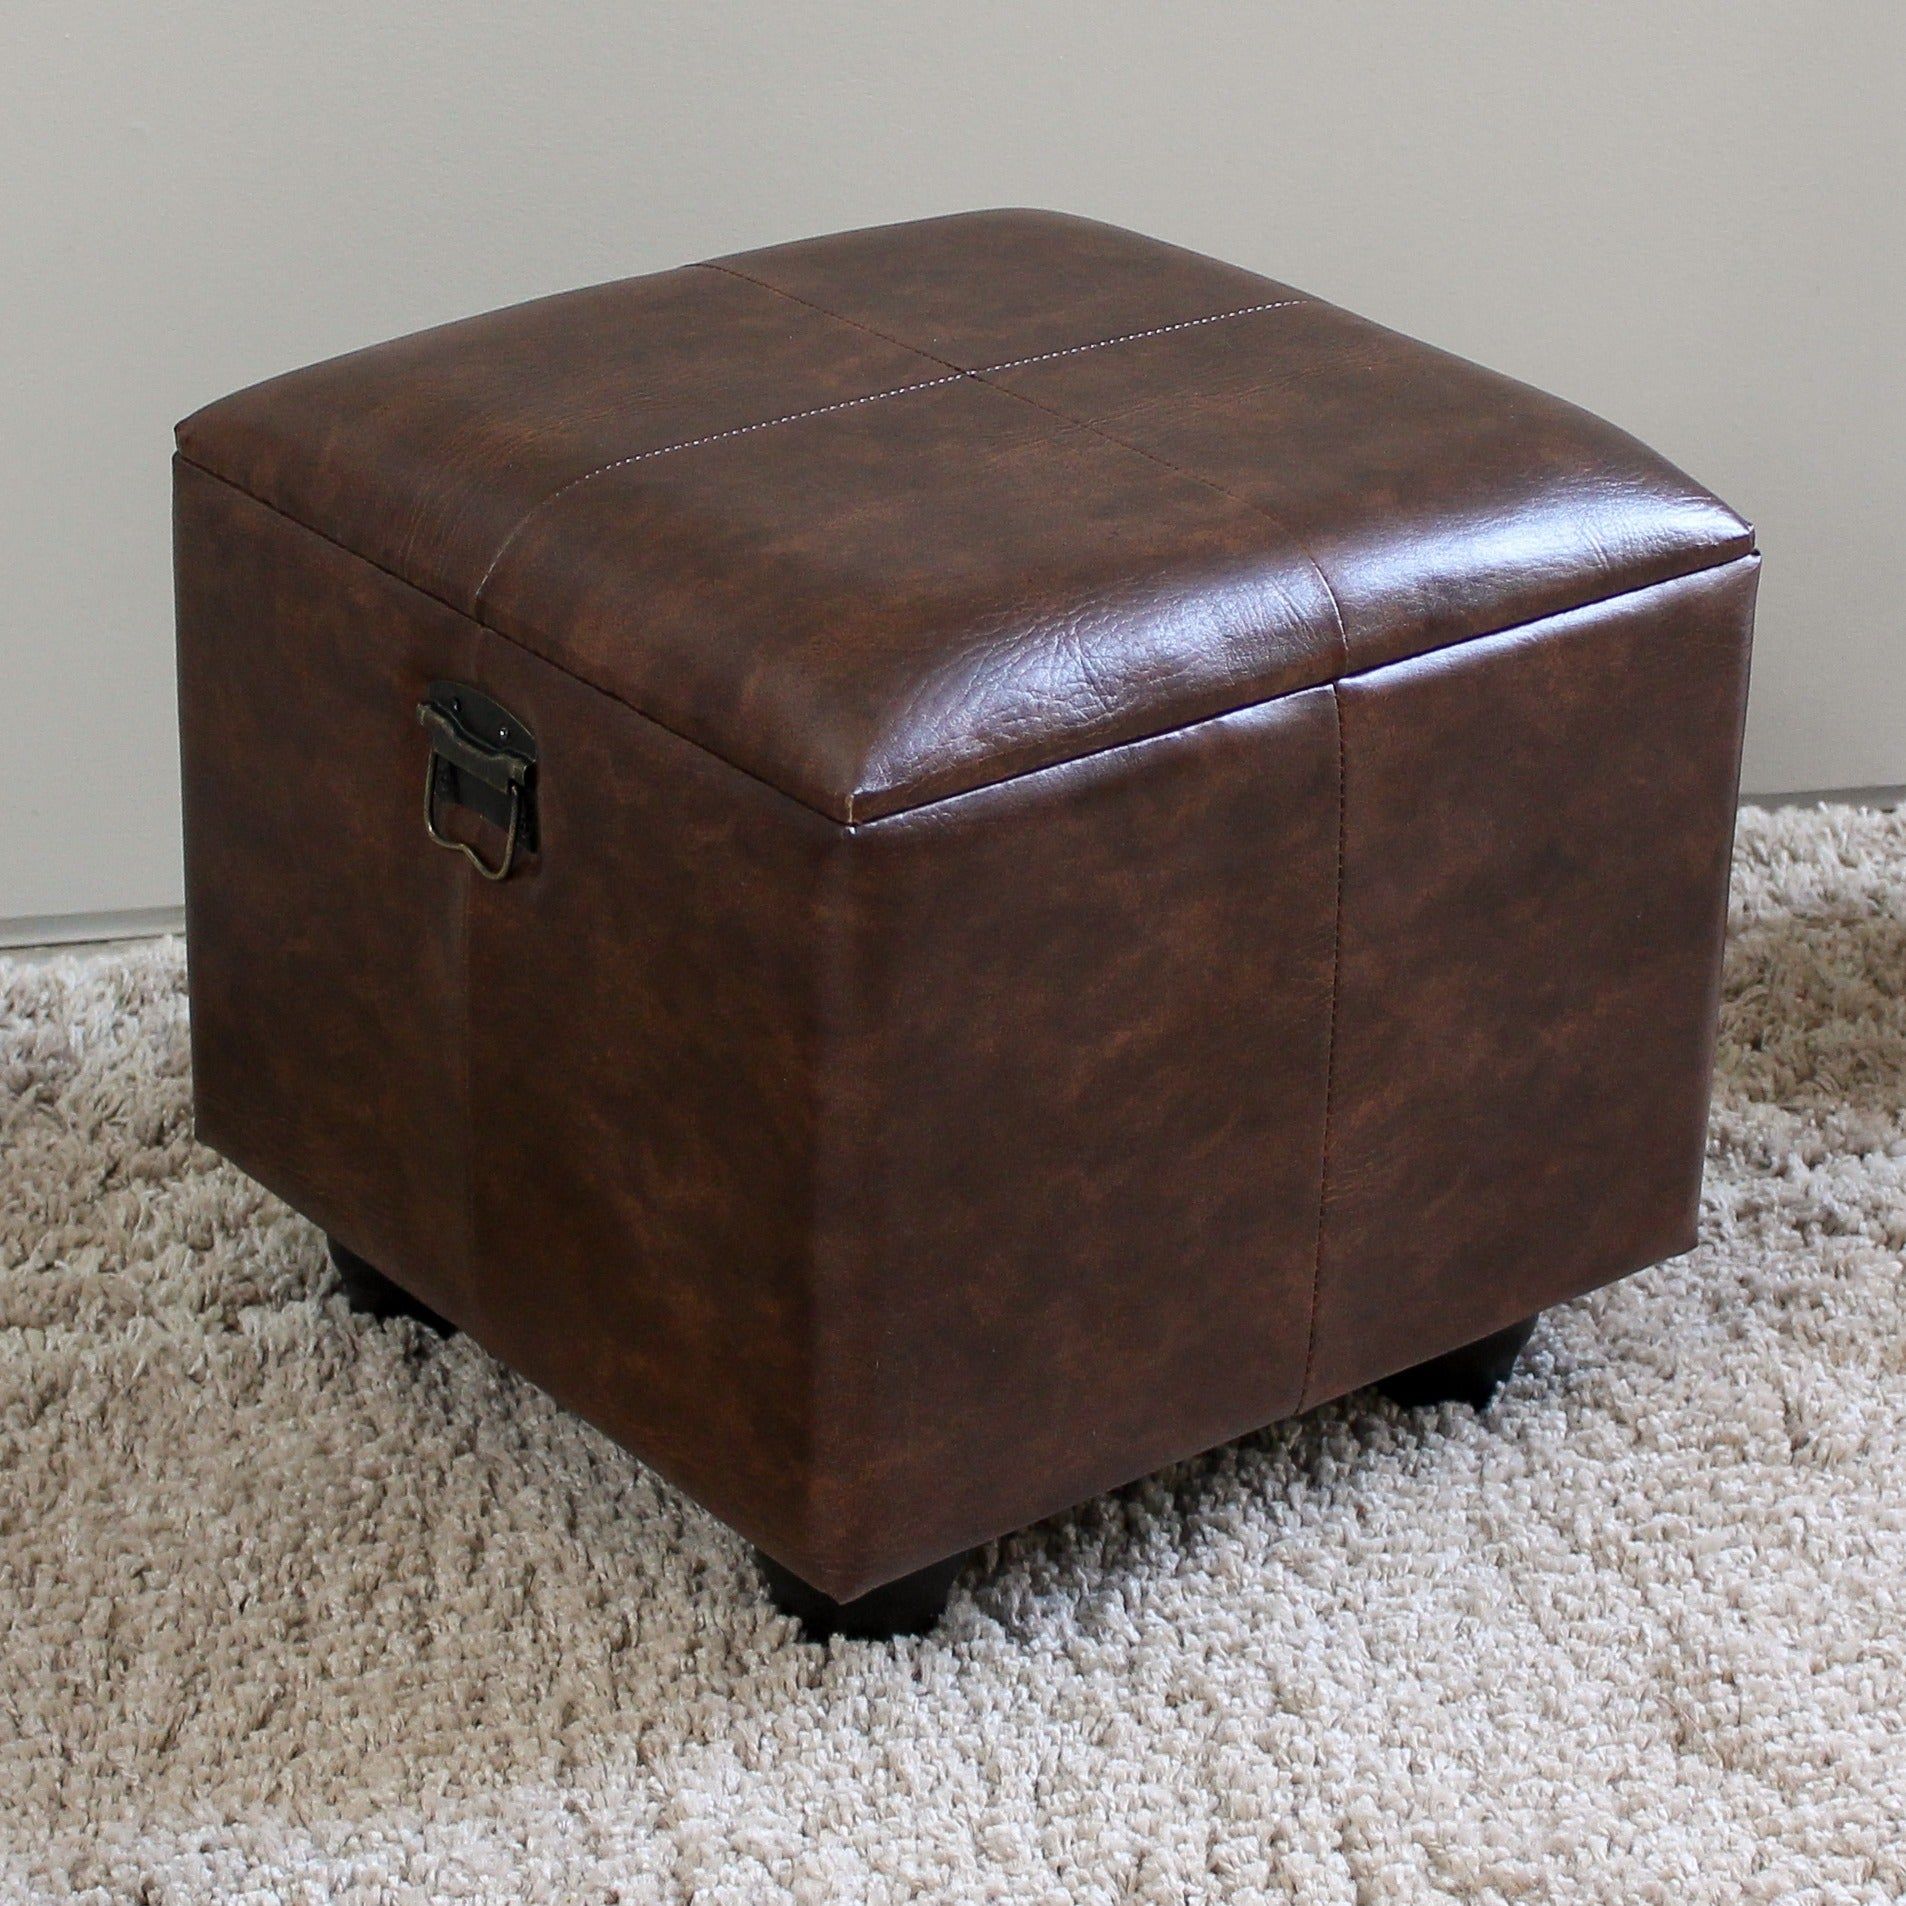 International Caravan Carmel Square Storage Ottoman | Ebay Inside Round Beige Faux Leather Ottomans With Pull Tab (View 6 of 20)